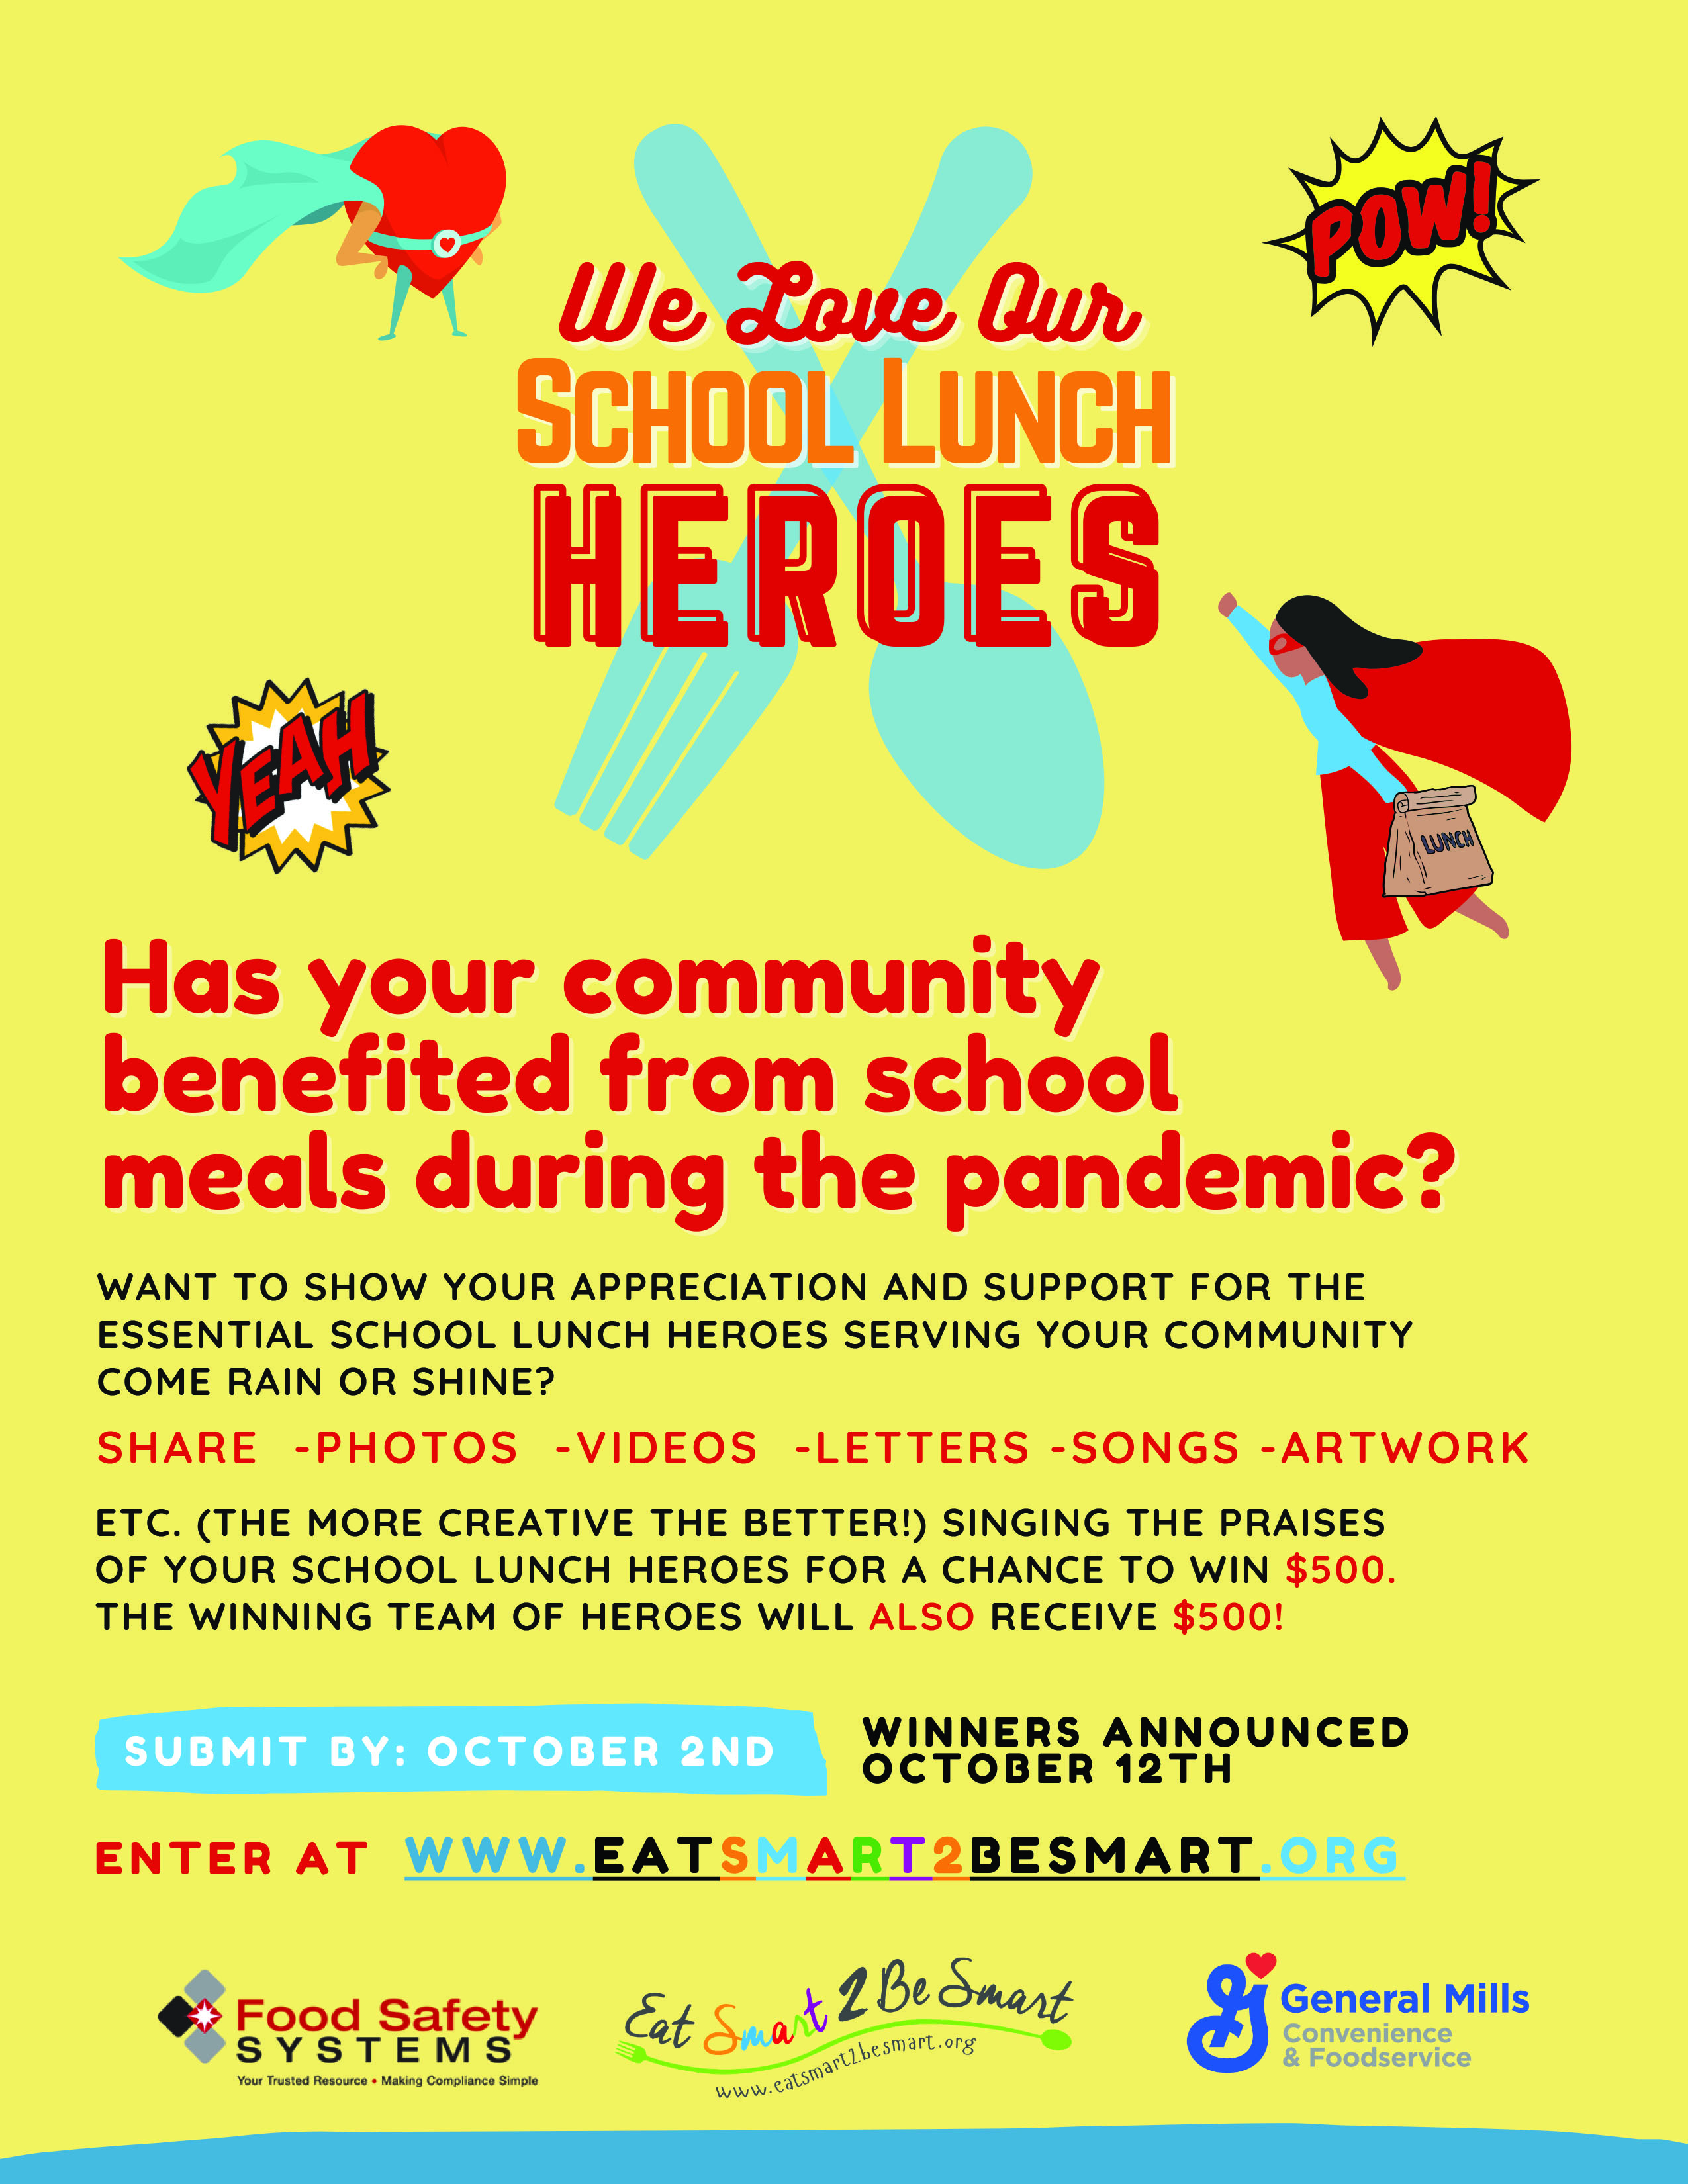 We Love Our School Lunch Heroes Contest!